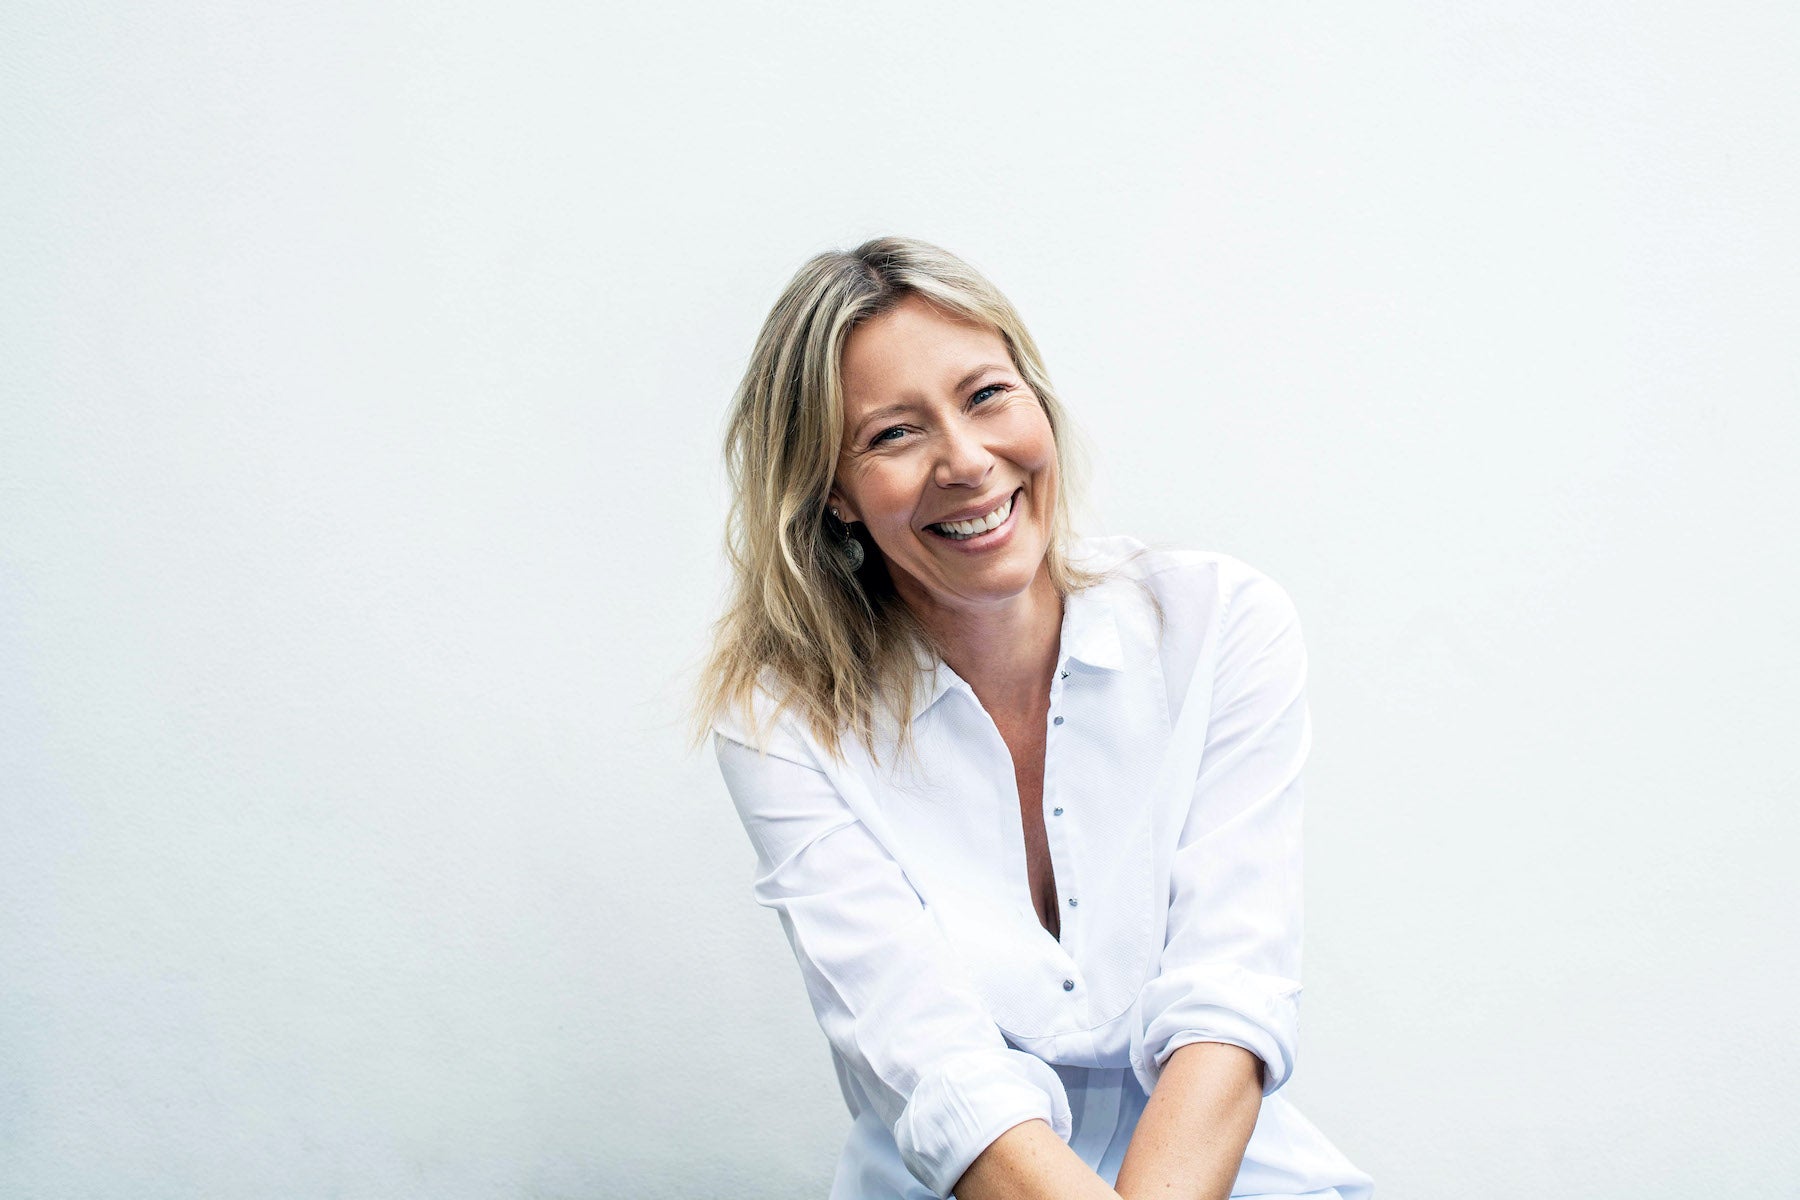 How To Master Your Day With Rebekah Brown, Founder of MPowder